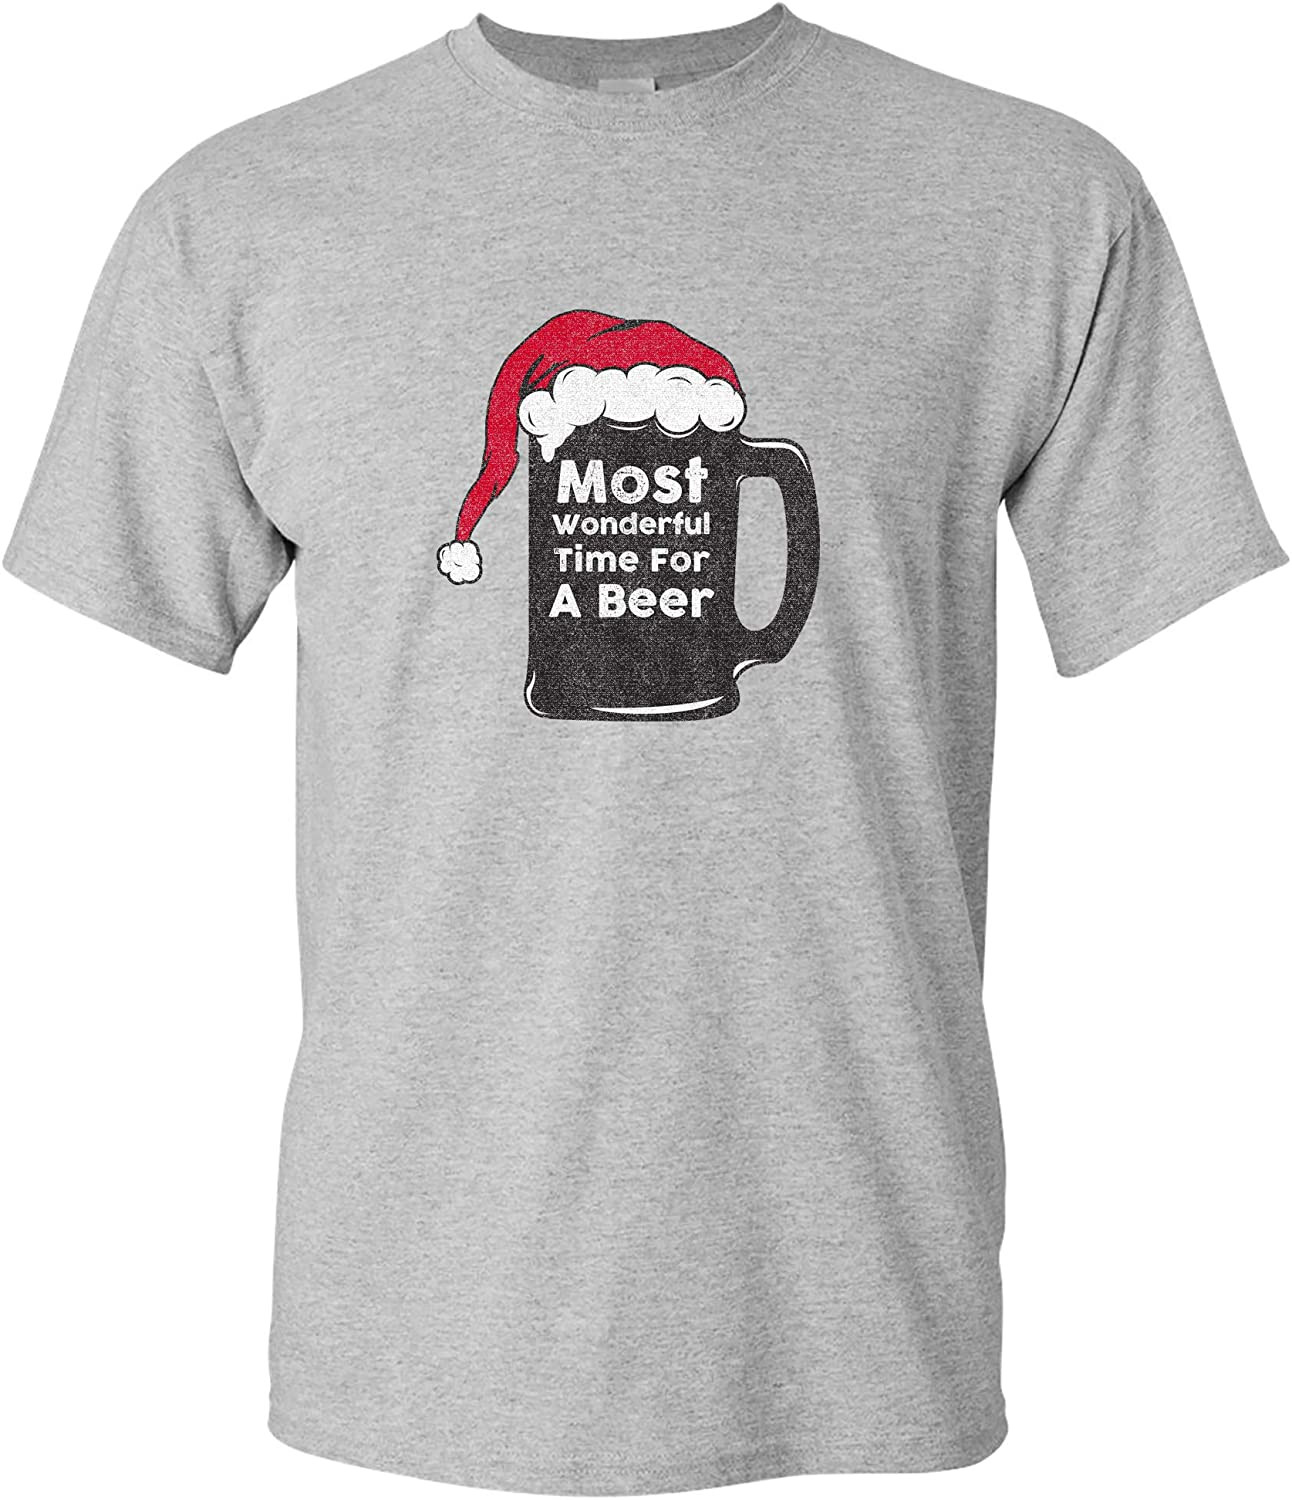 Most Wonderful Time For A Beer T-Shirt